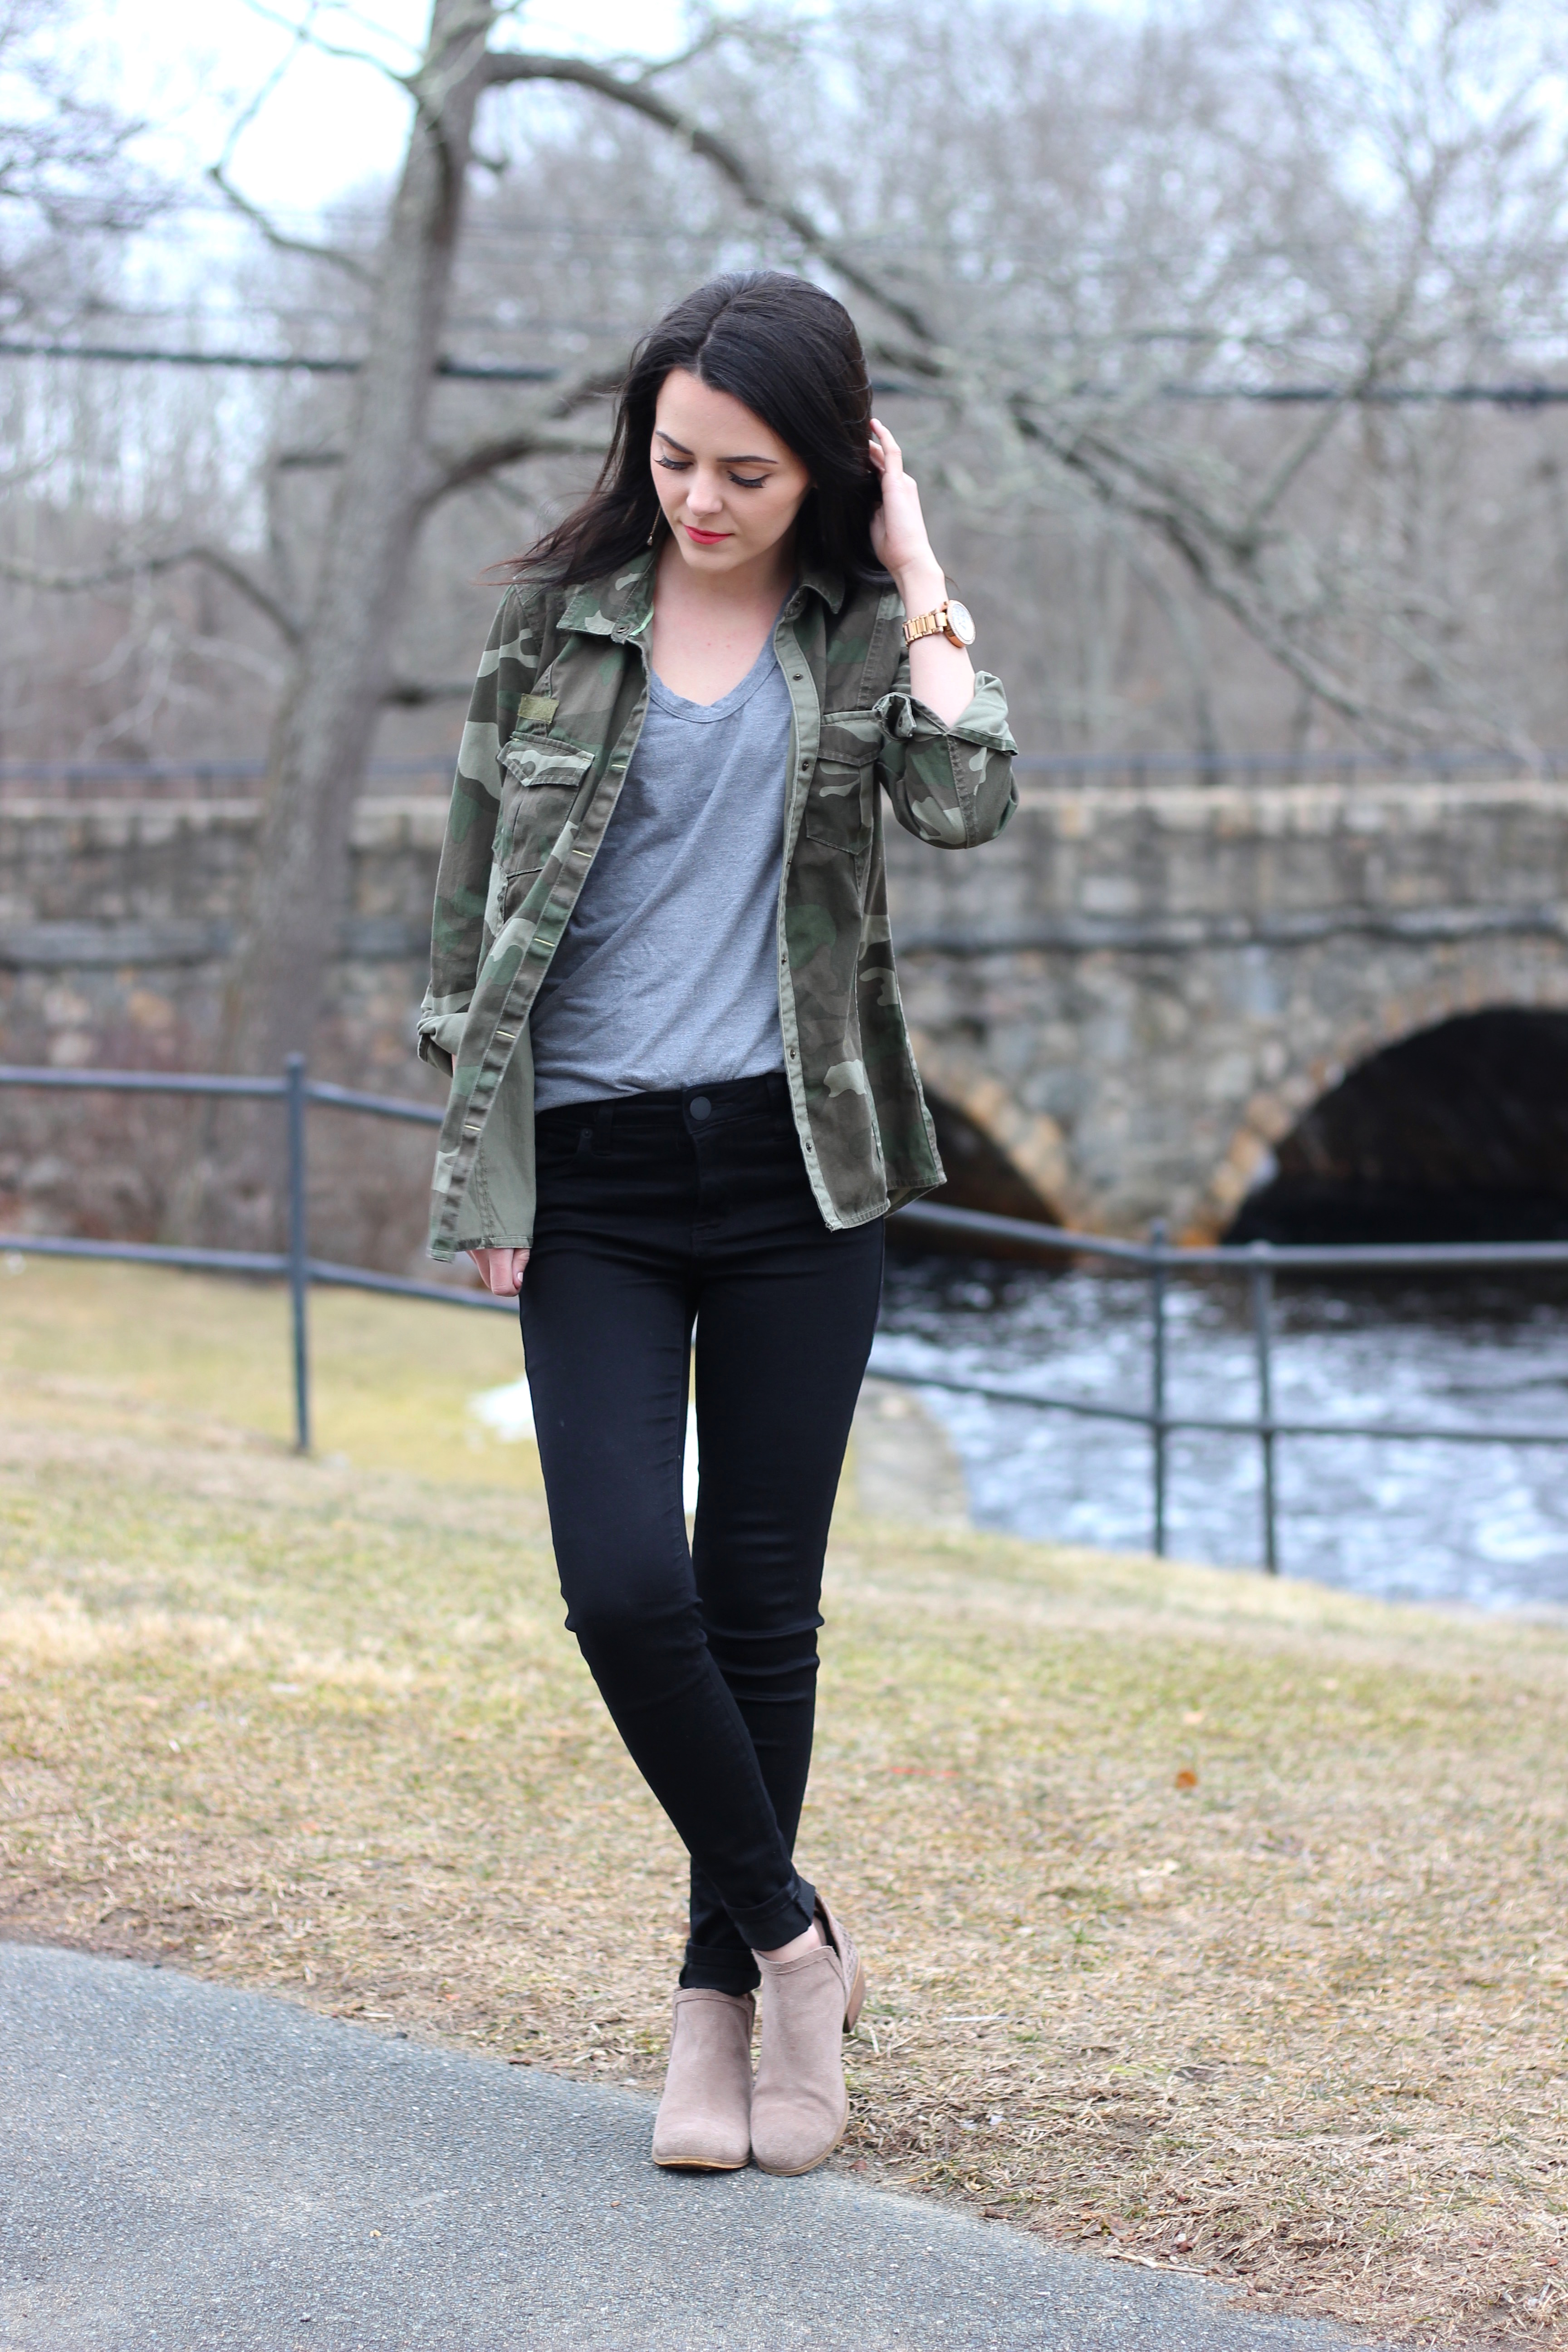 How to Style a Camo Jacket